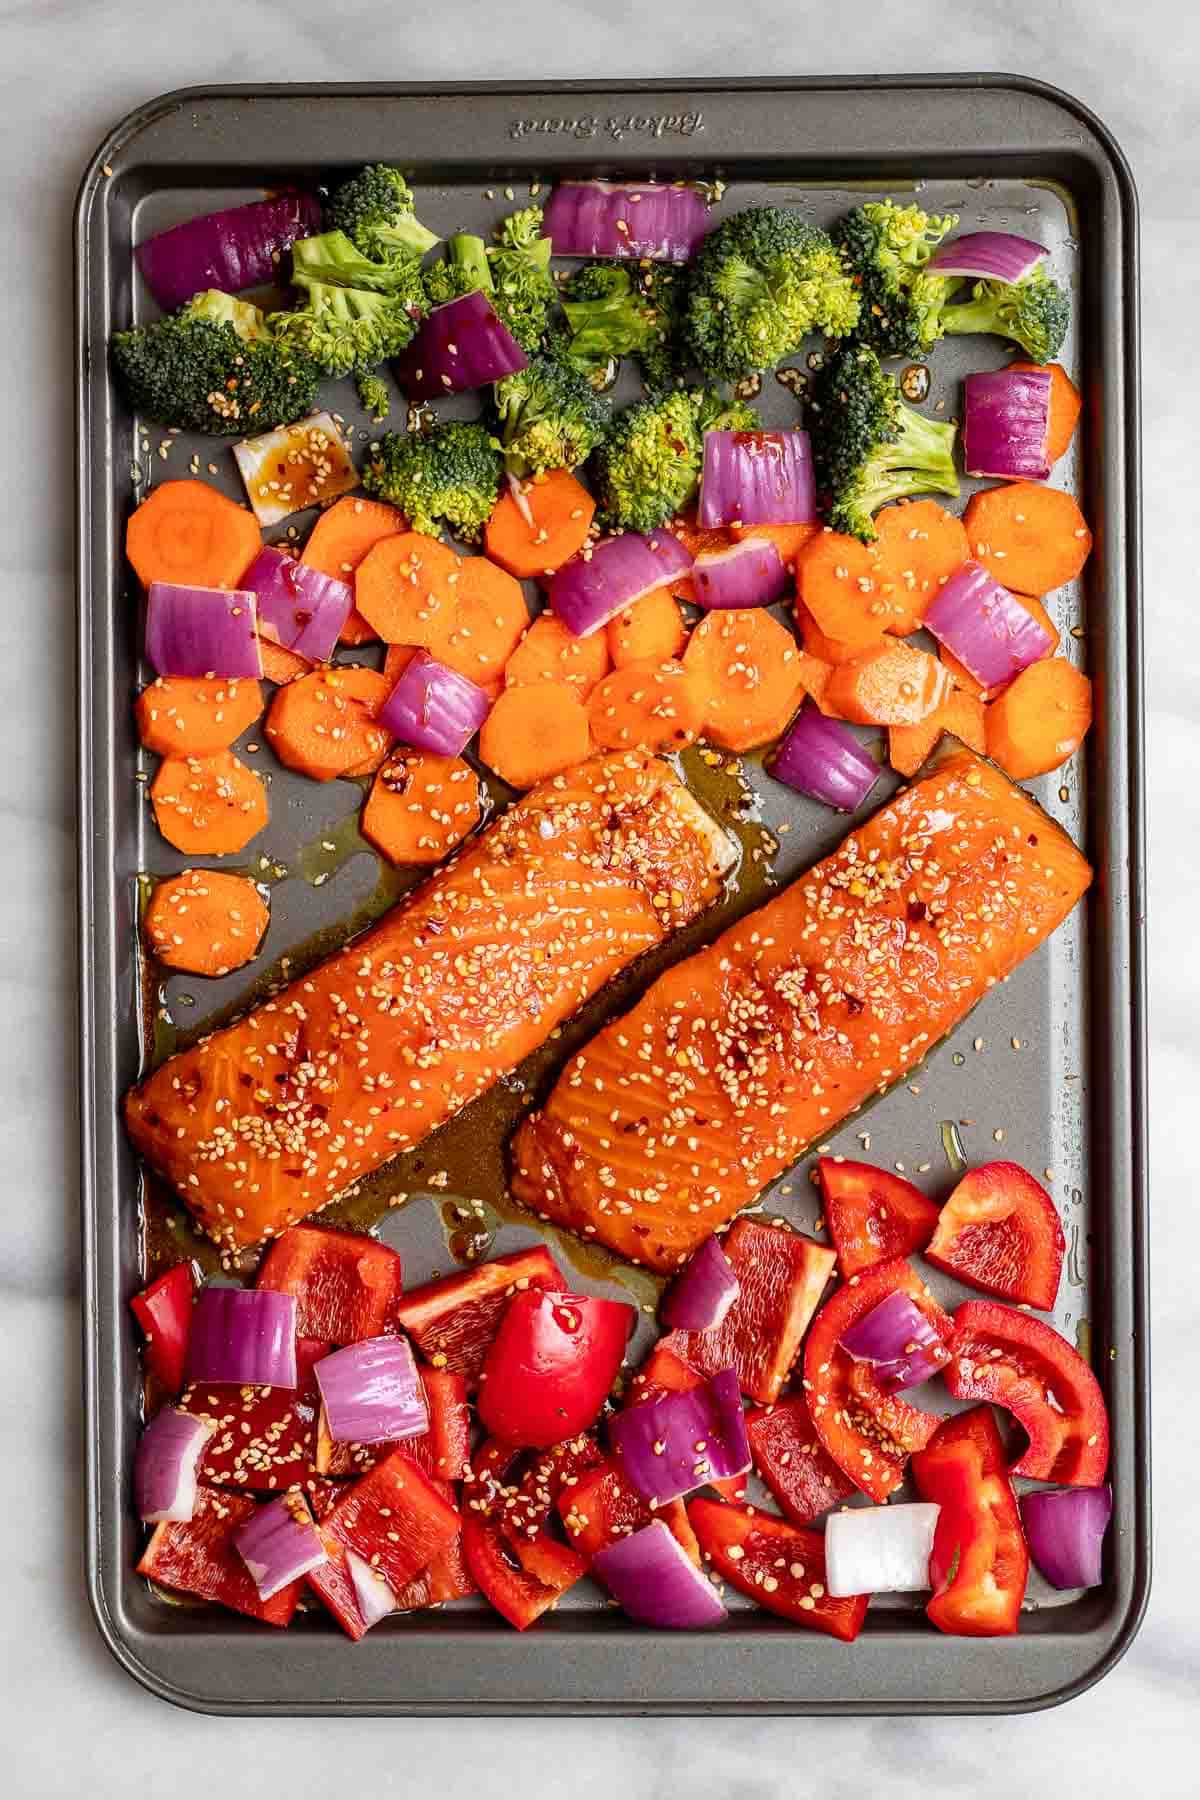 Salmon and veggies before going in the oven on a cookie sheet.